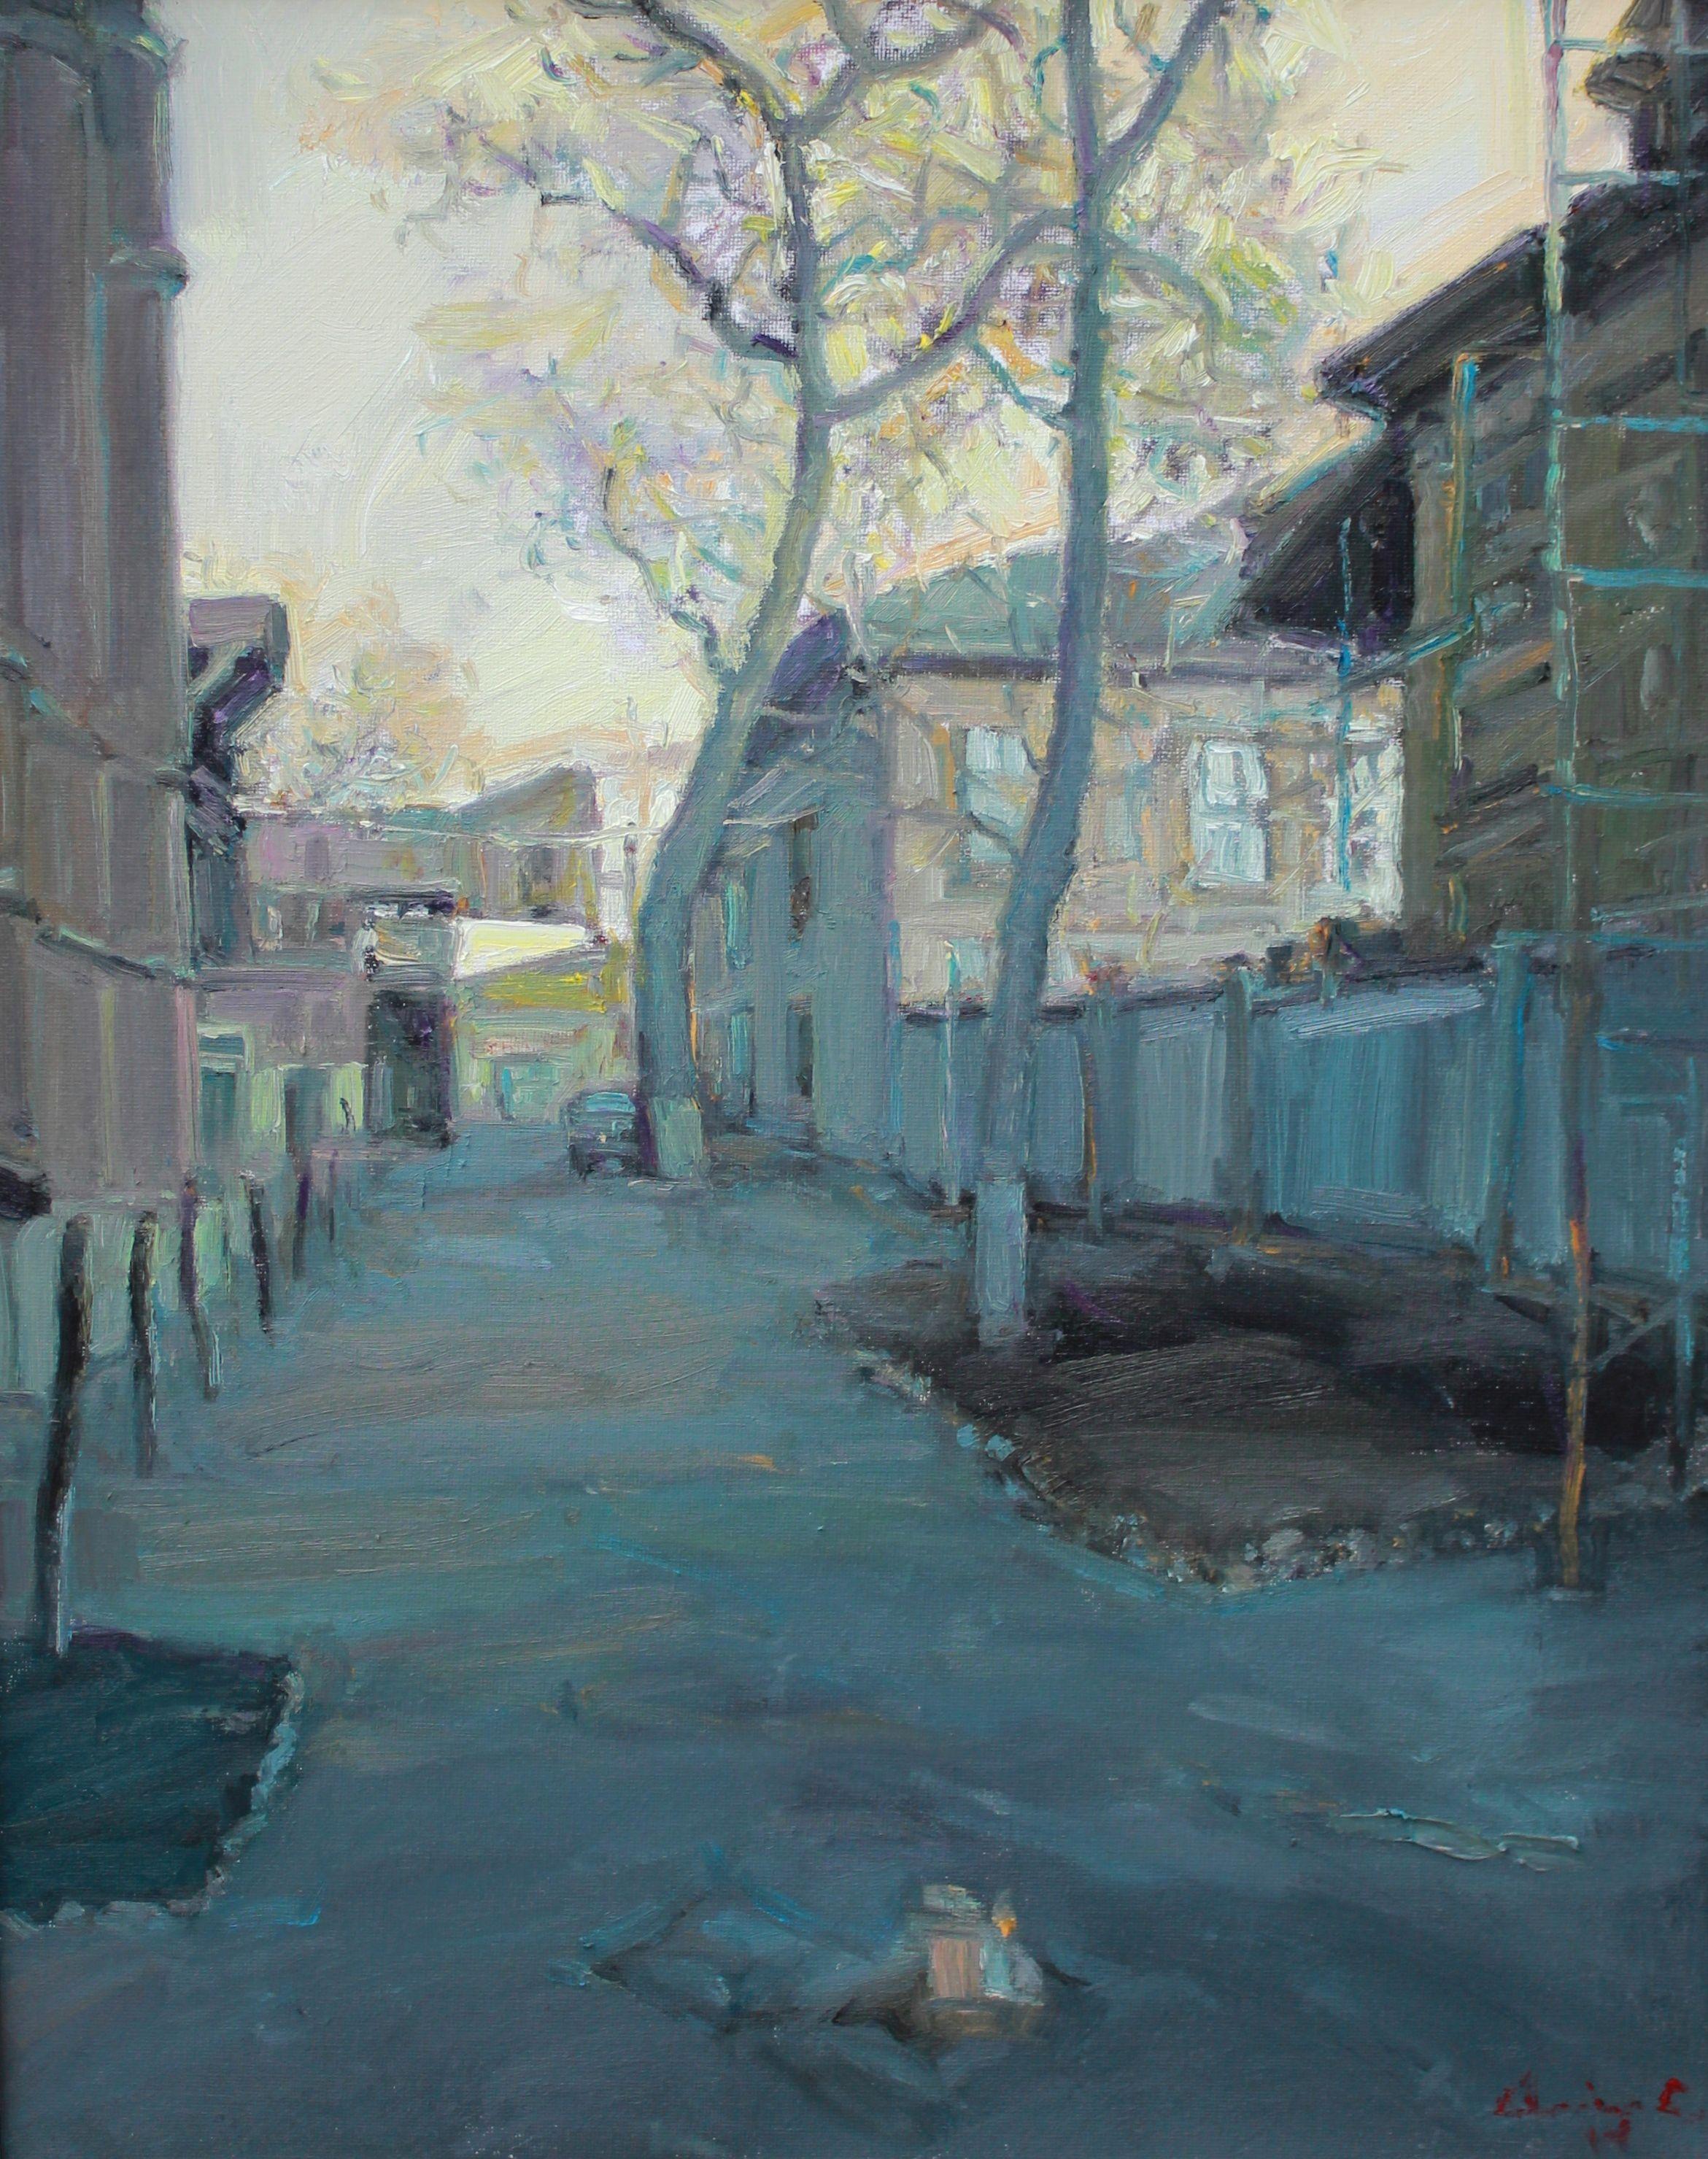 Charles Choi Landscape Painting - Alley, Painting, Oil on Canvas